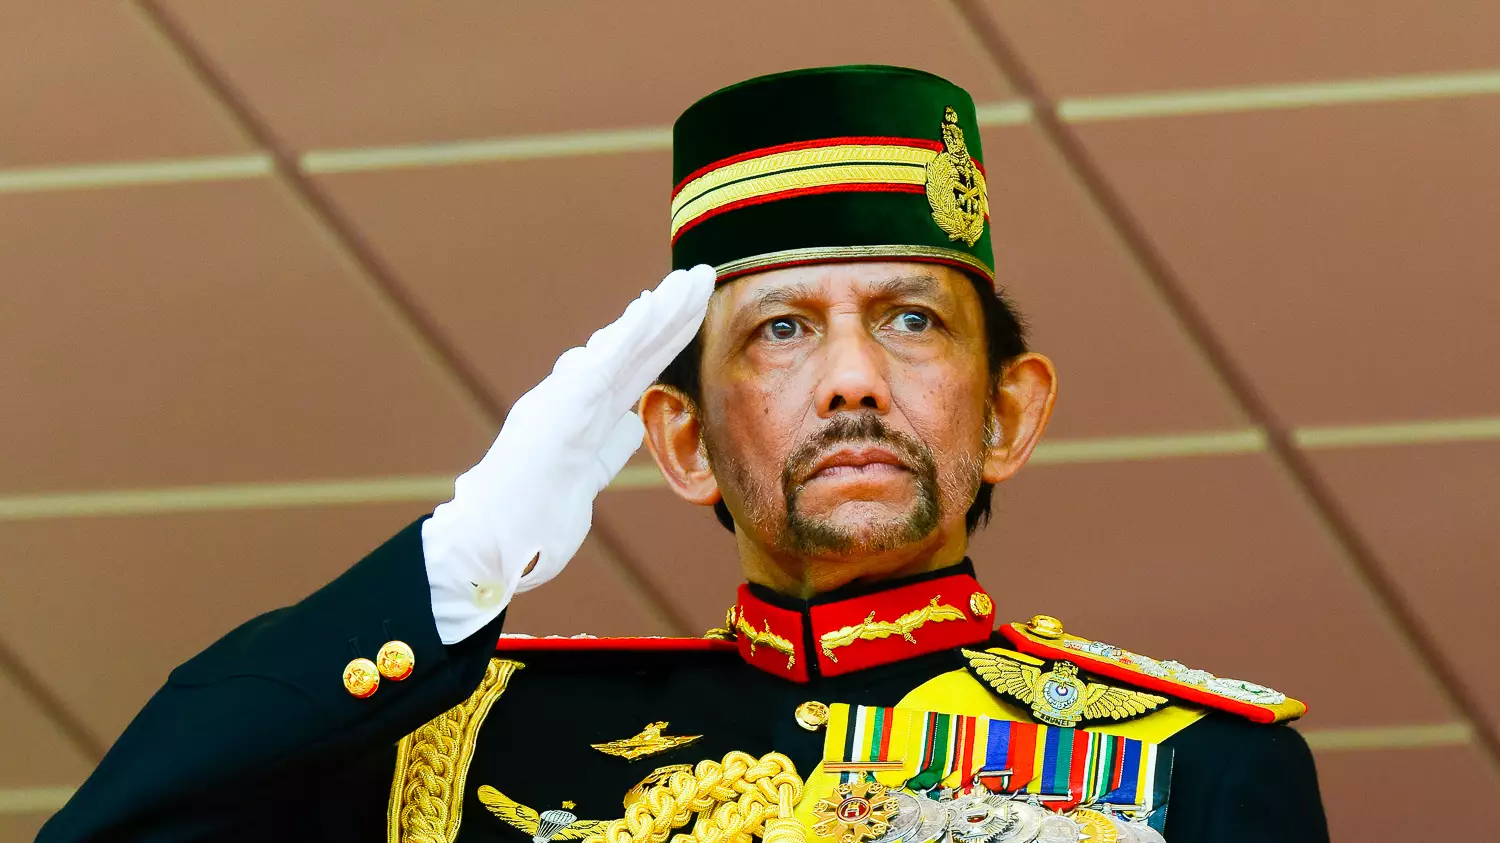 Leader Of Brunei Delays Introduction Of Death Penalty For Homosexuals